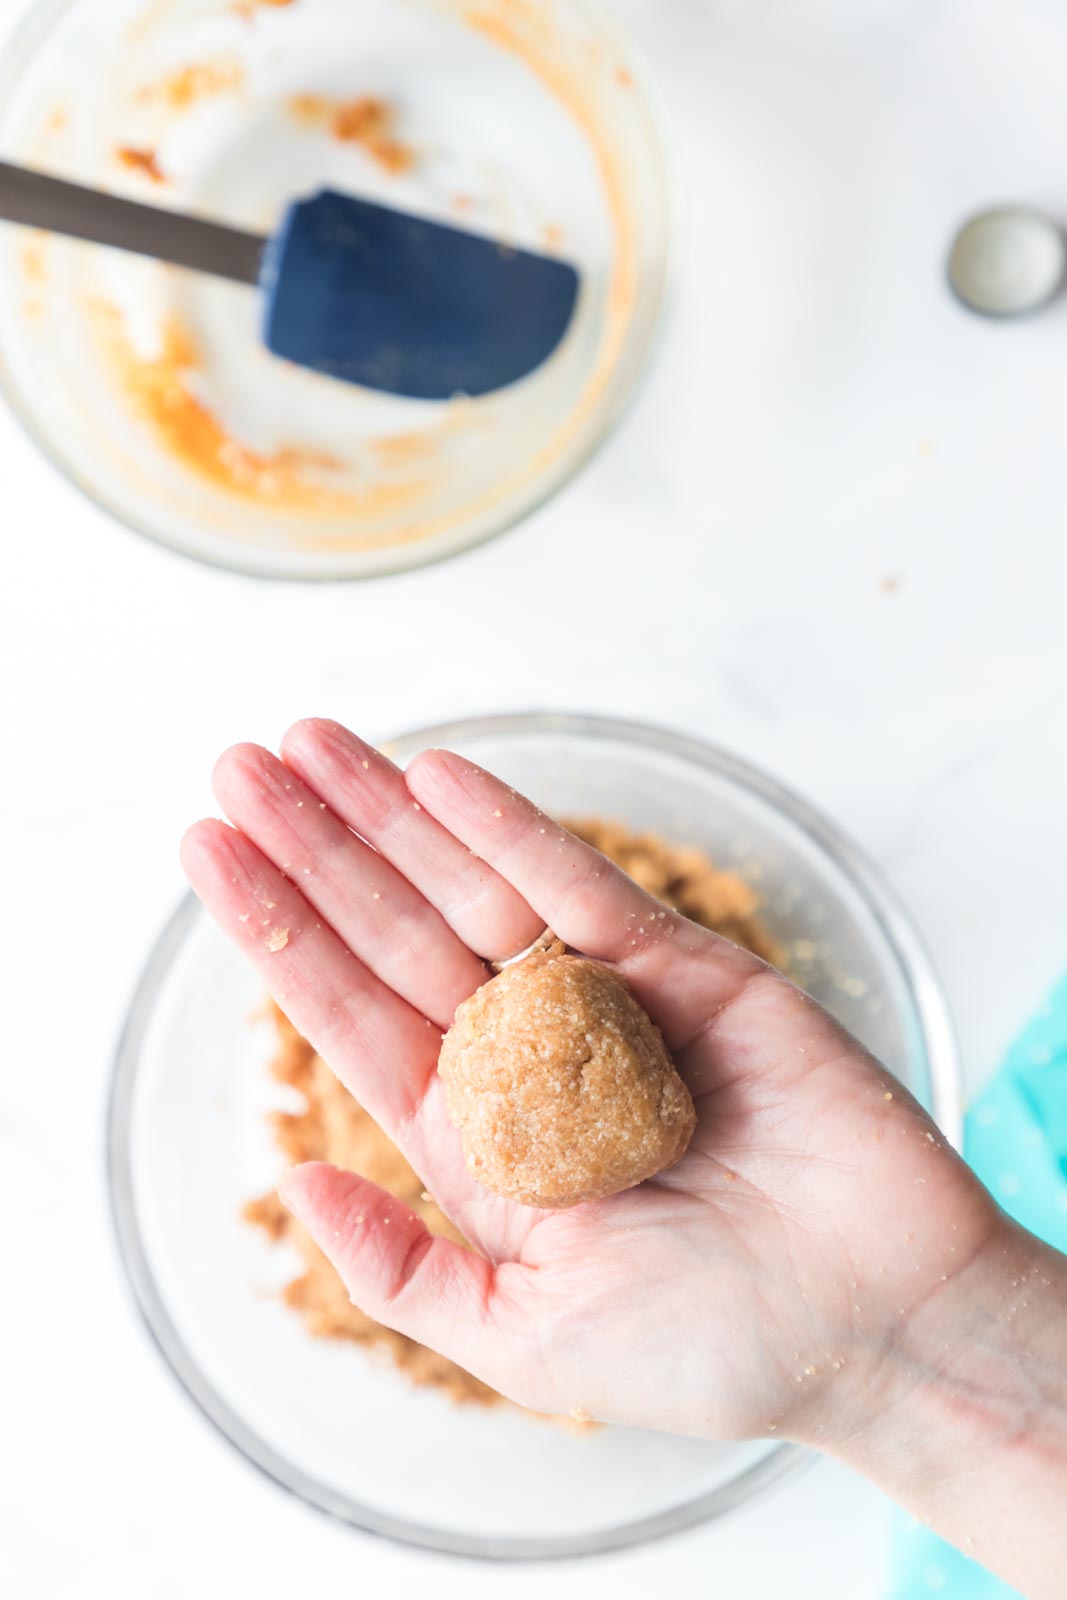 a ball of cookie dough held in a hand